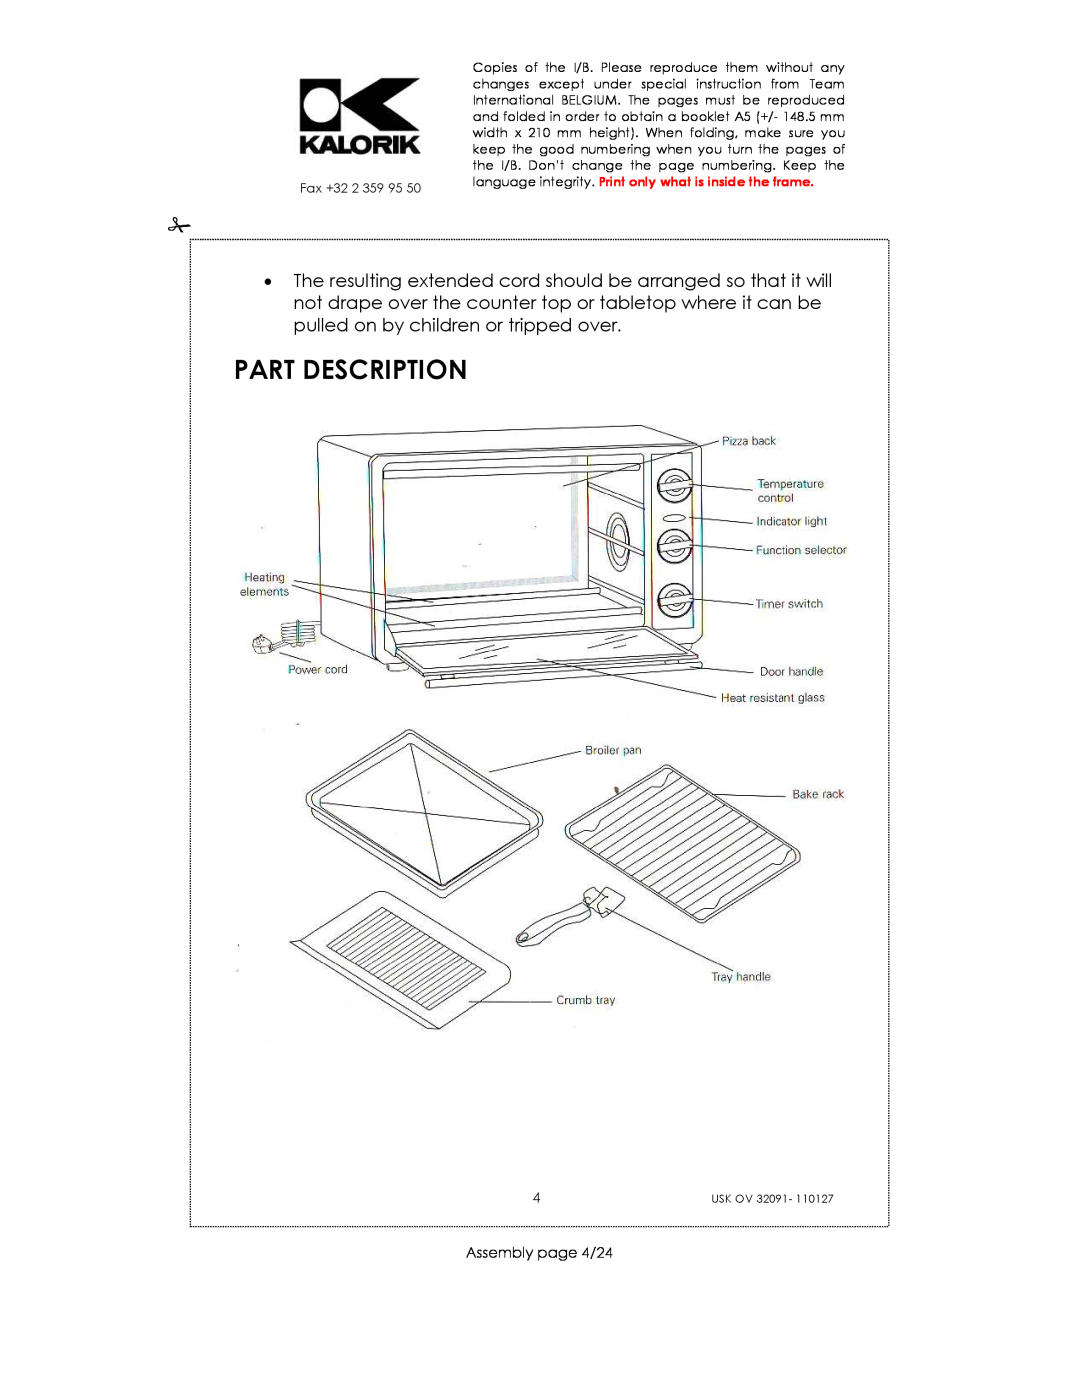 Kalorik USK OV 32091 manual Part Description, Assembly page 4/24, language integrity. Print only what is inside the frame 